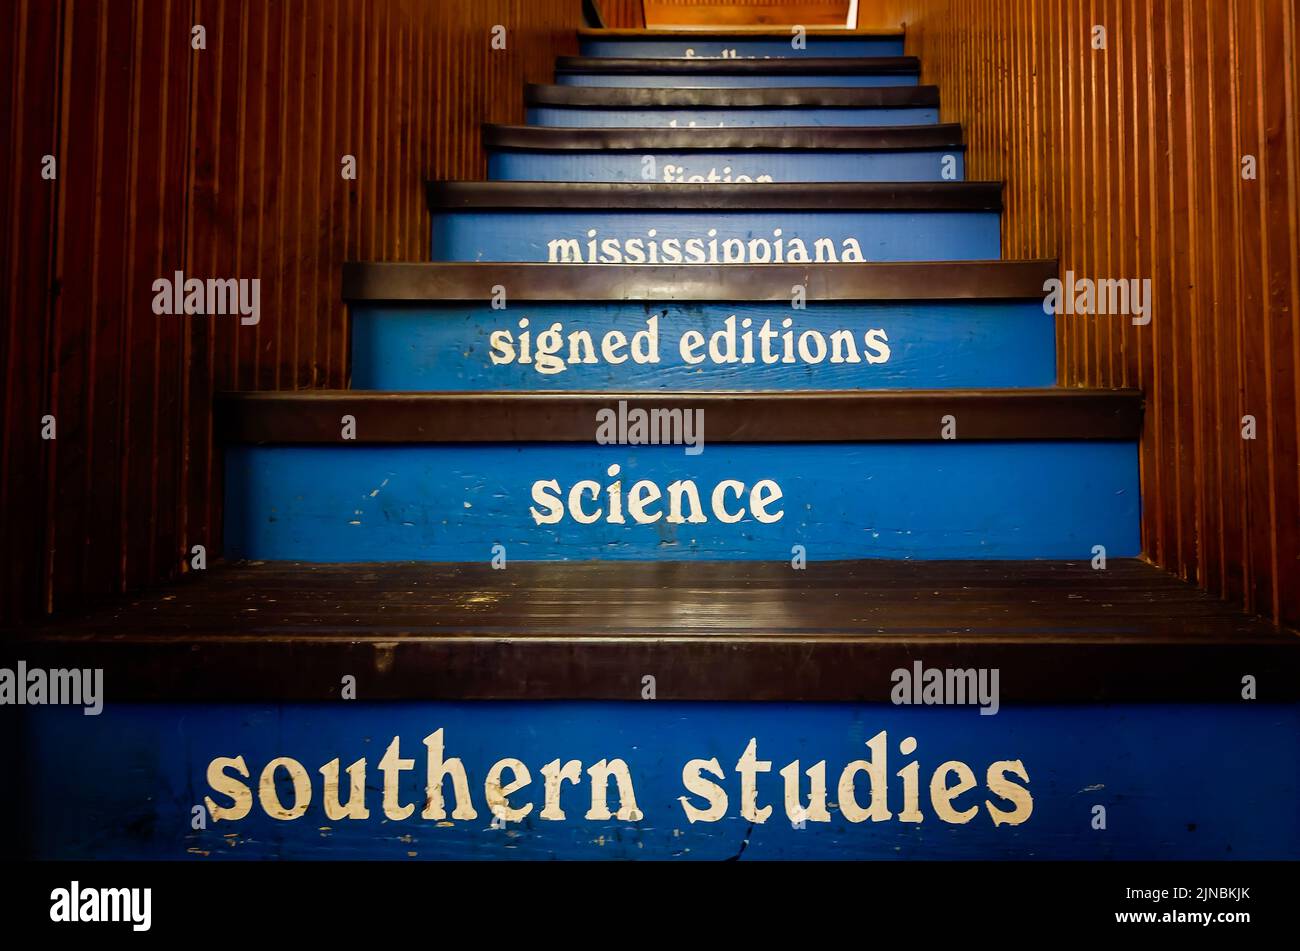 The staircase at Square Books is labeled with subjects ranging from Southern Studies to Signed Editions and Mississippiana in Oxford, Mississippi. Stock Photo